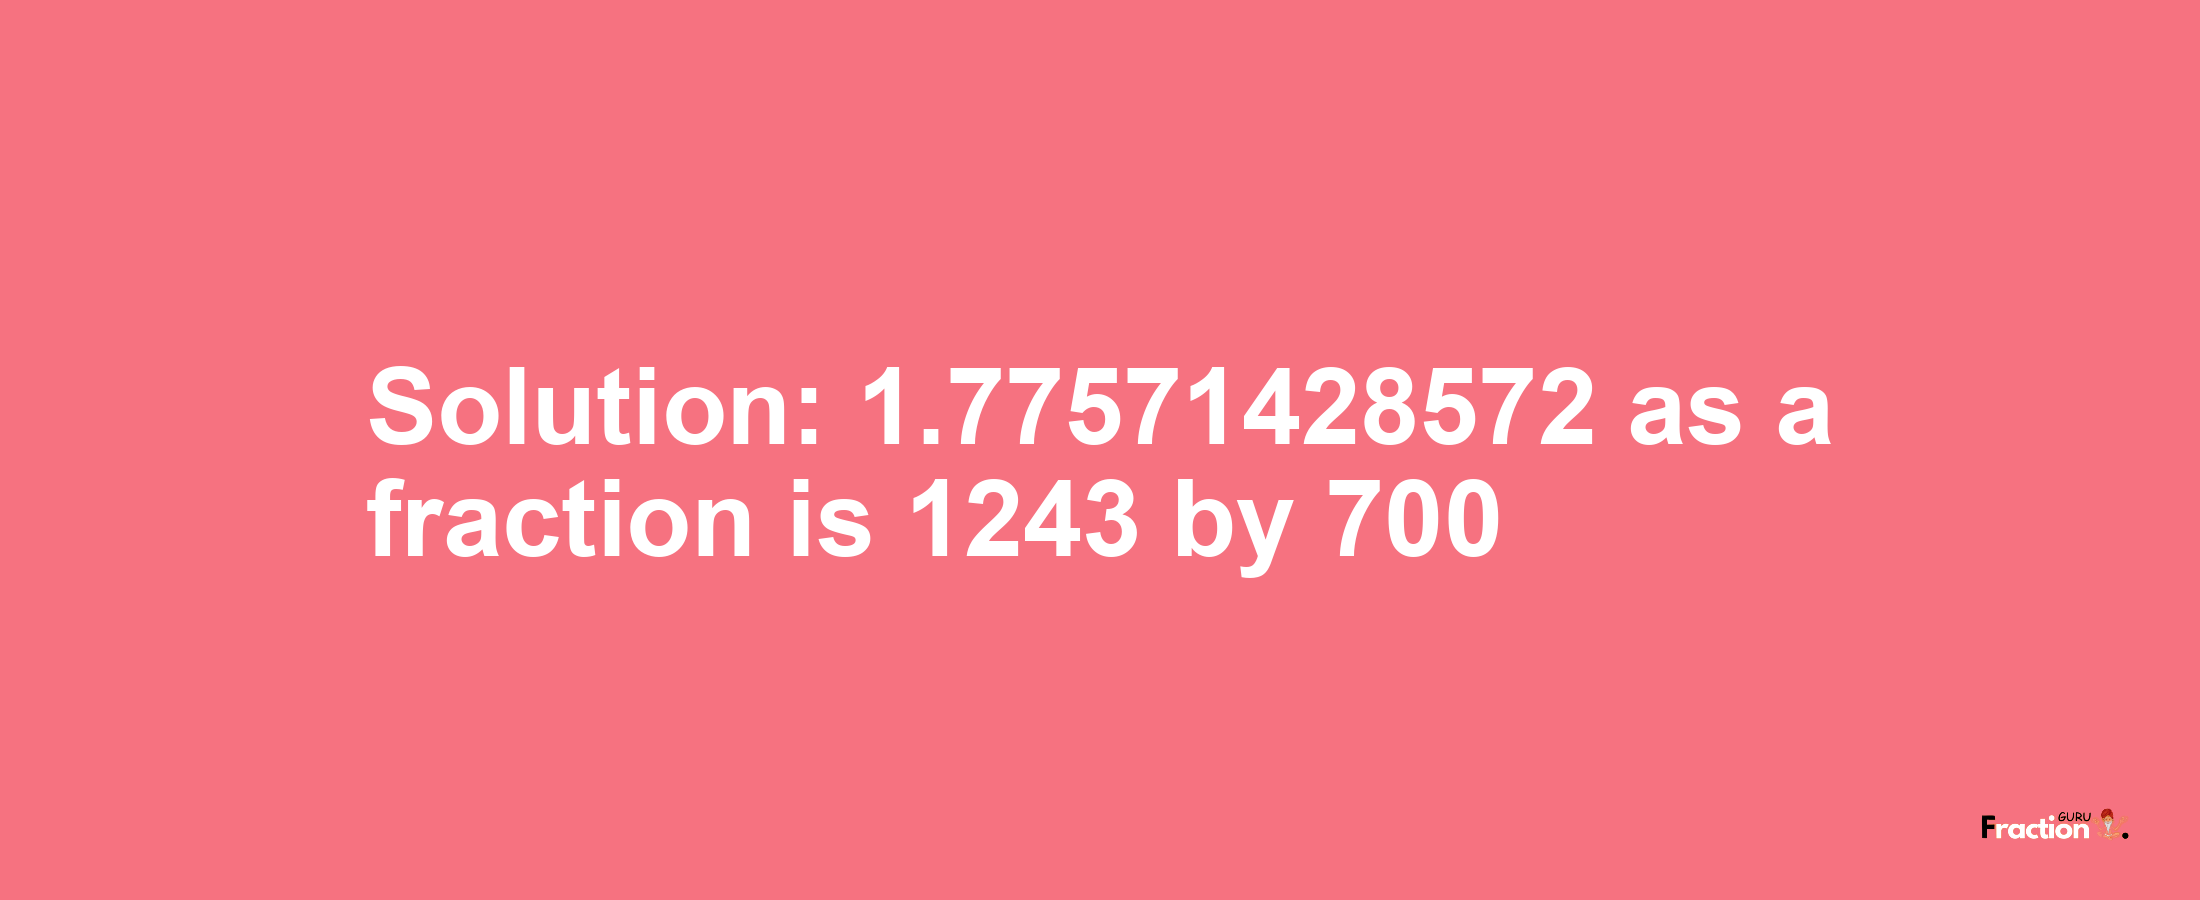 Solution:1.77571428572 as a fraction is 1243/700